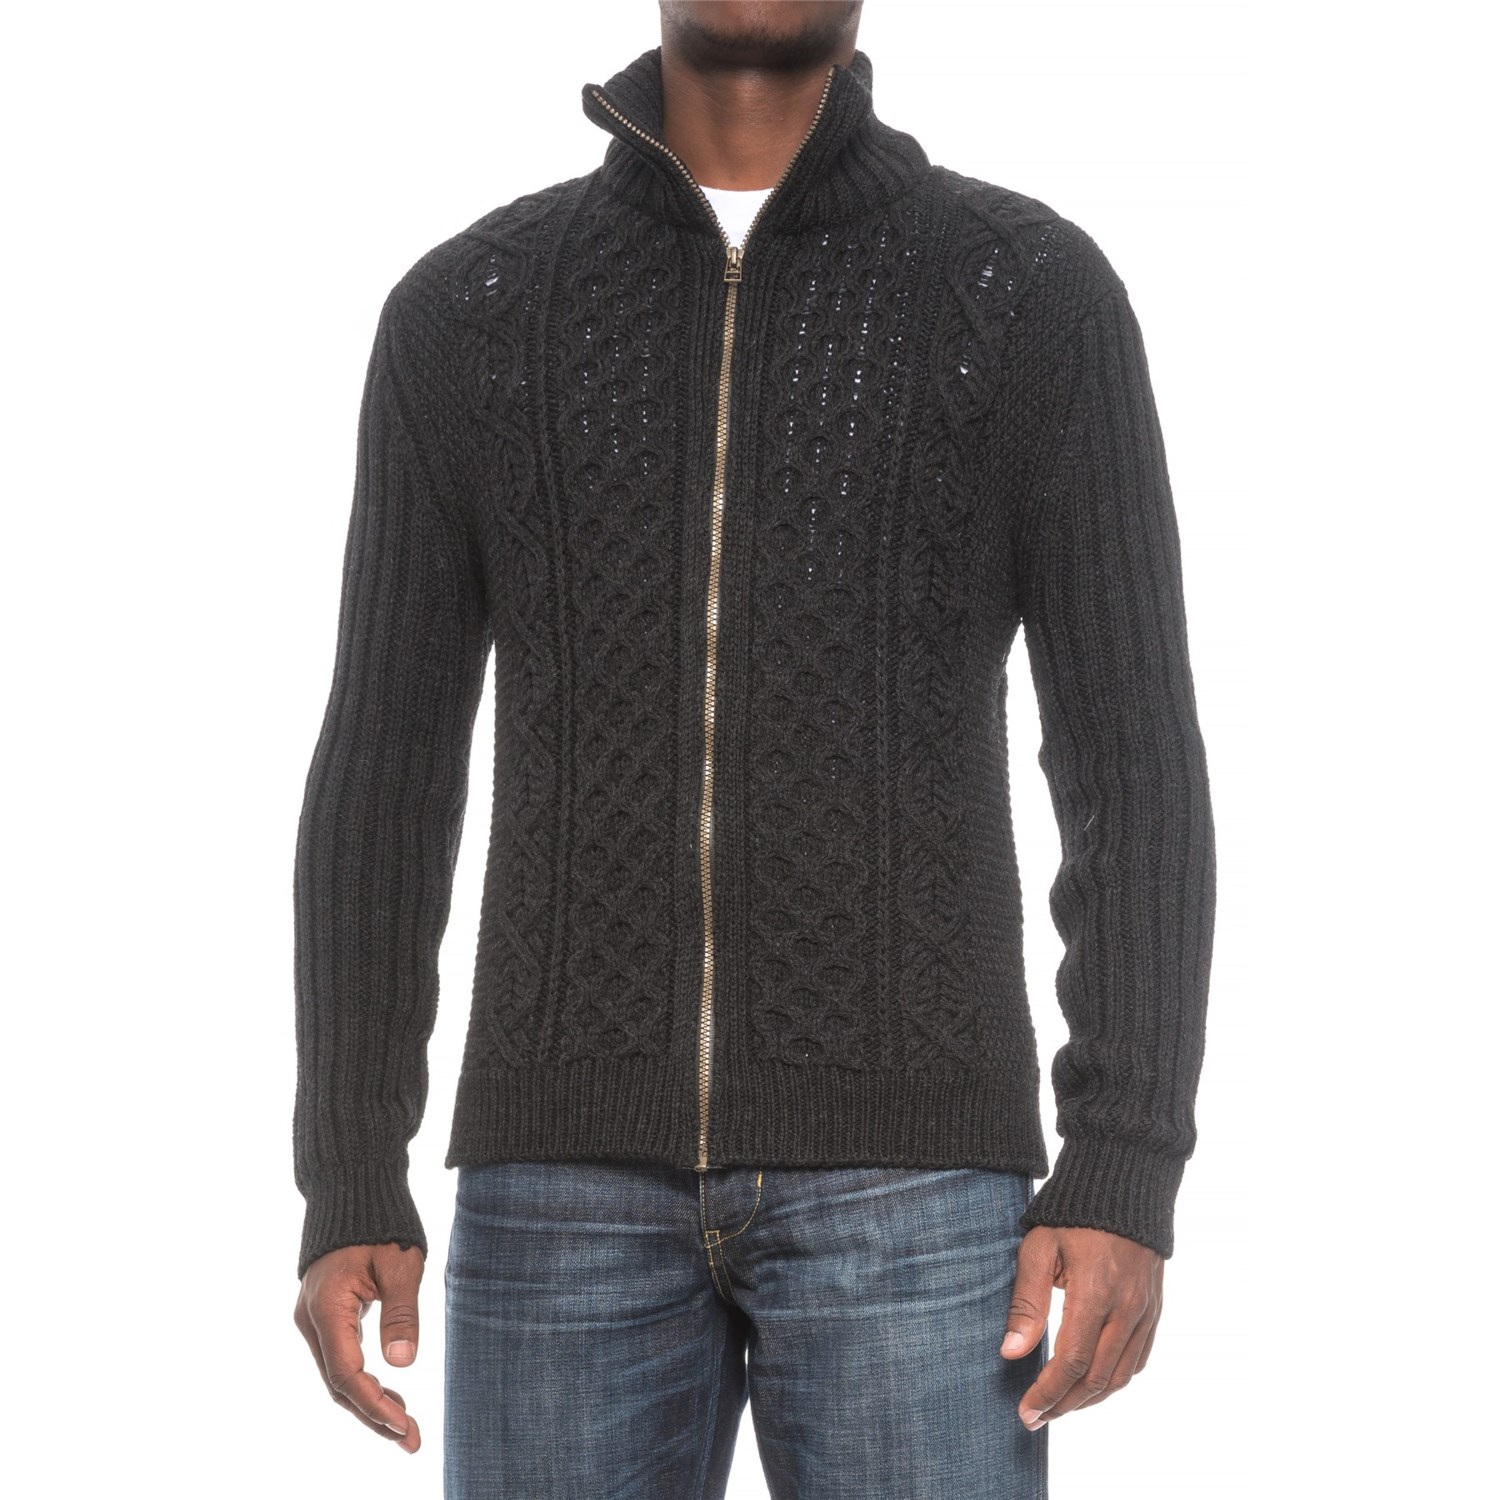 Peregrine by J.G. Glover Aran Full-Zip Sweater (For Men) - Save 42%